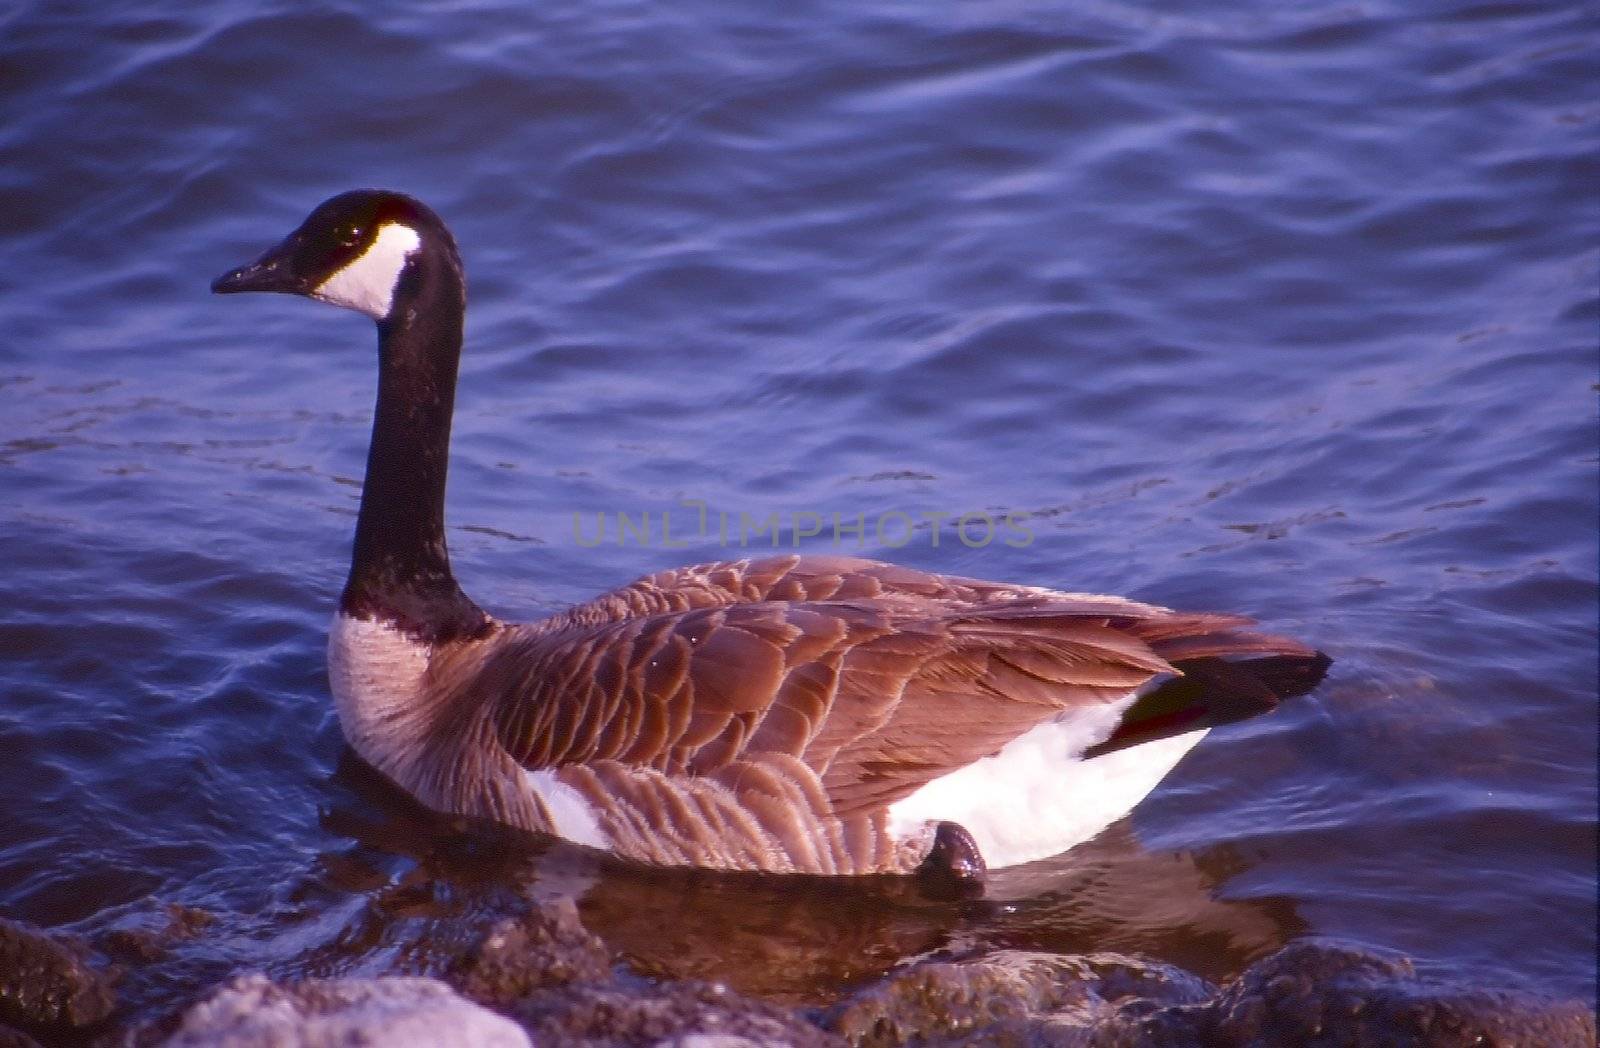 The Canada Goose (Branta canadensis), also referred to as the Canadian Goose,[1] is a goose belonging to the genus Branta native to North America.